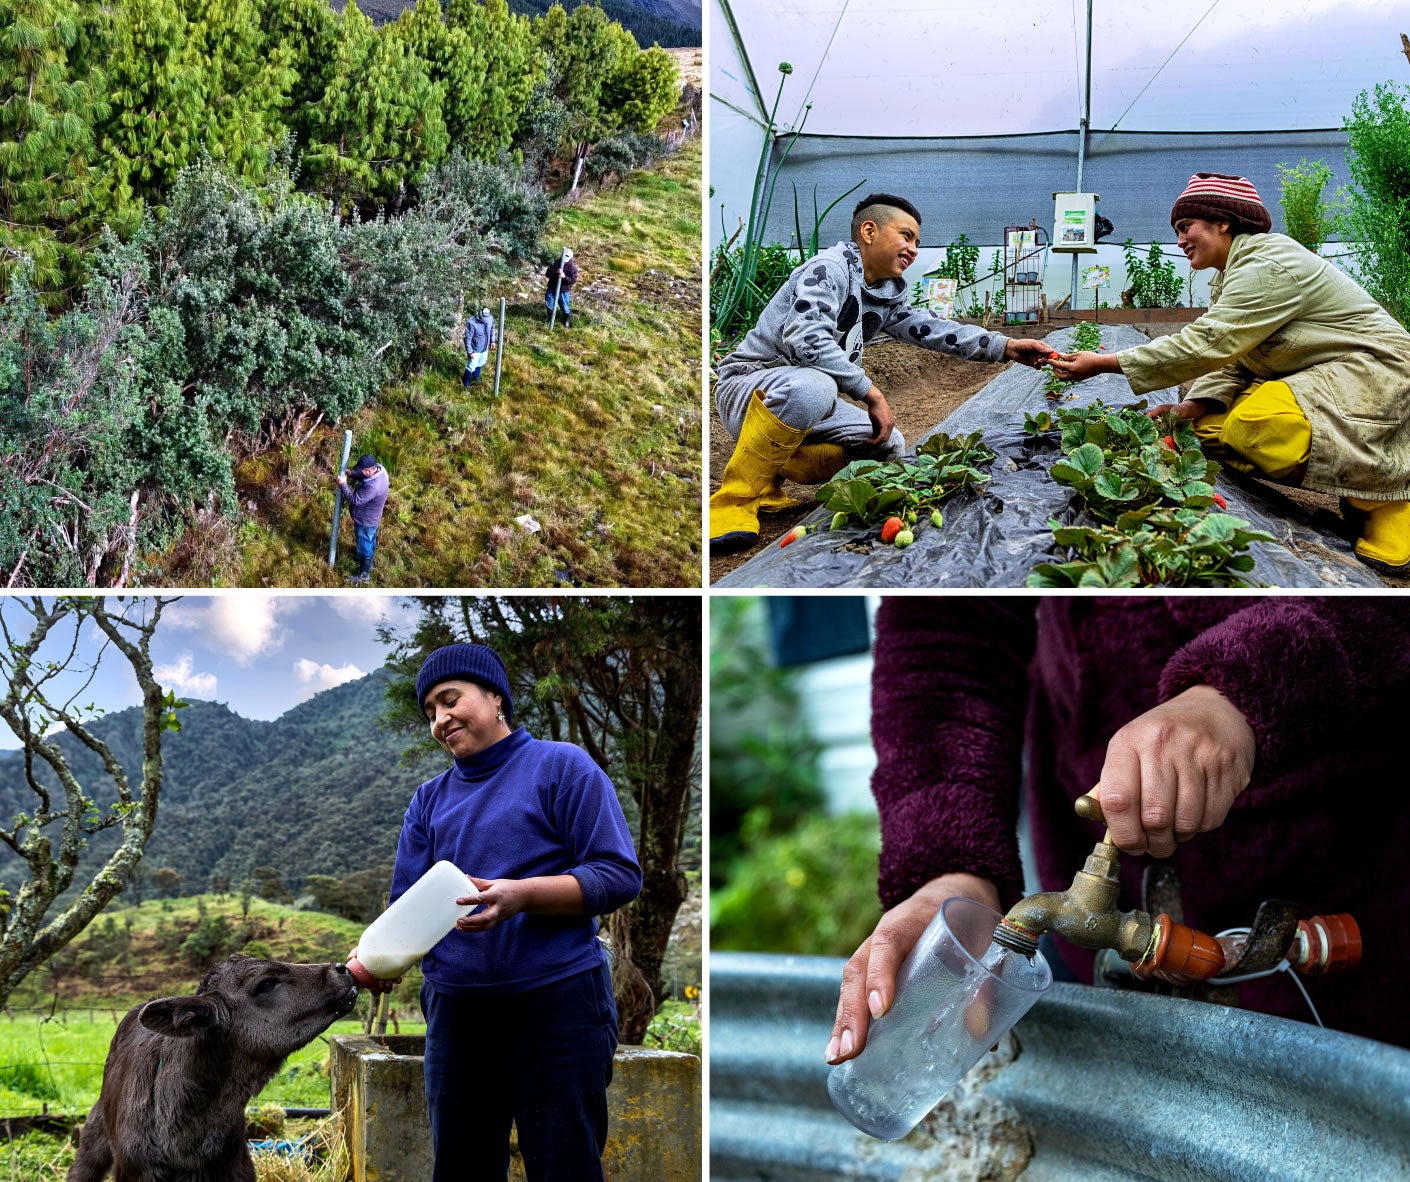 Collage of images of people working on climate adaptation projects in Ecuador